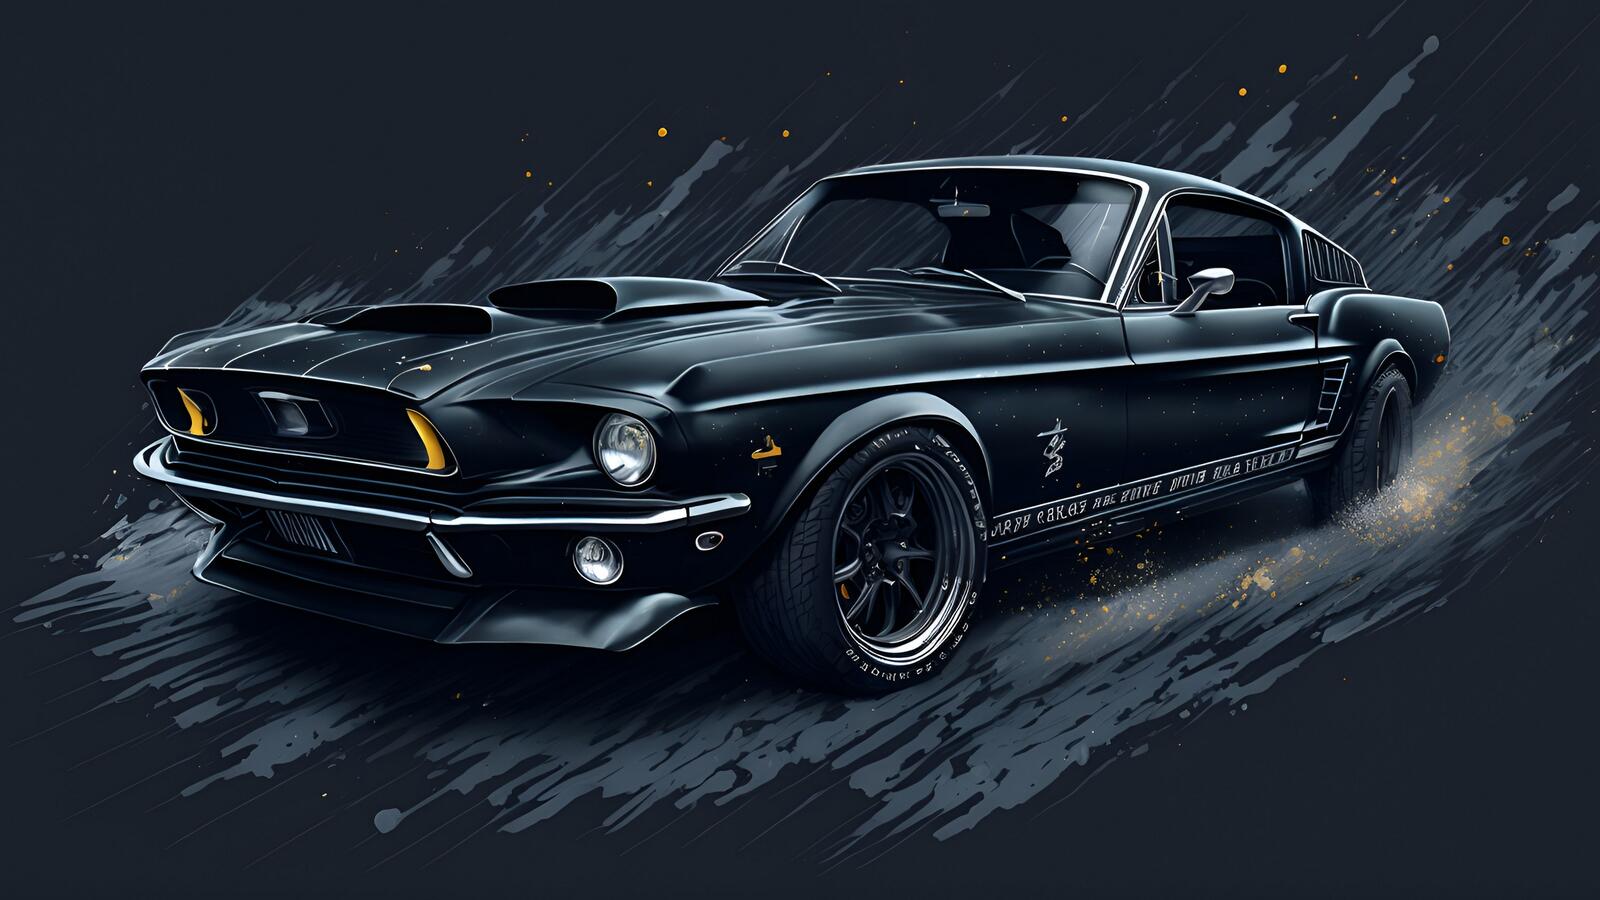 Free photo A drawing of the famous 1968 Ford Mustang